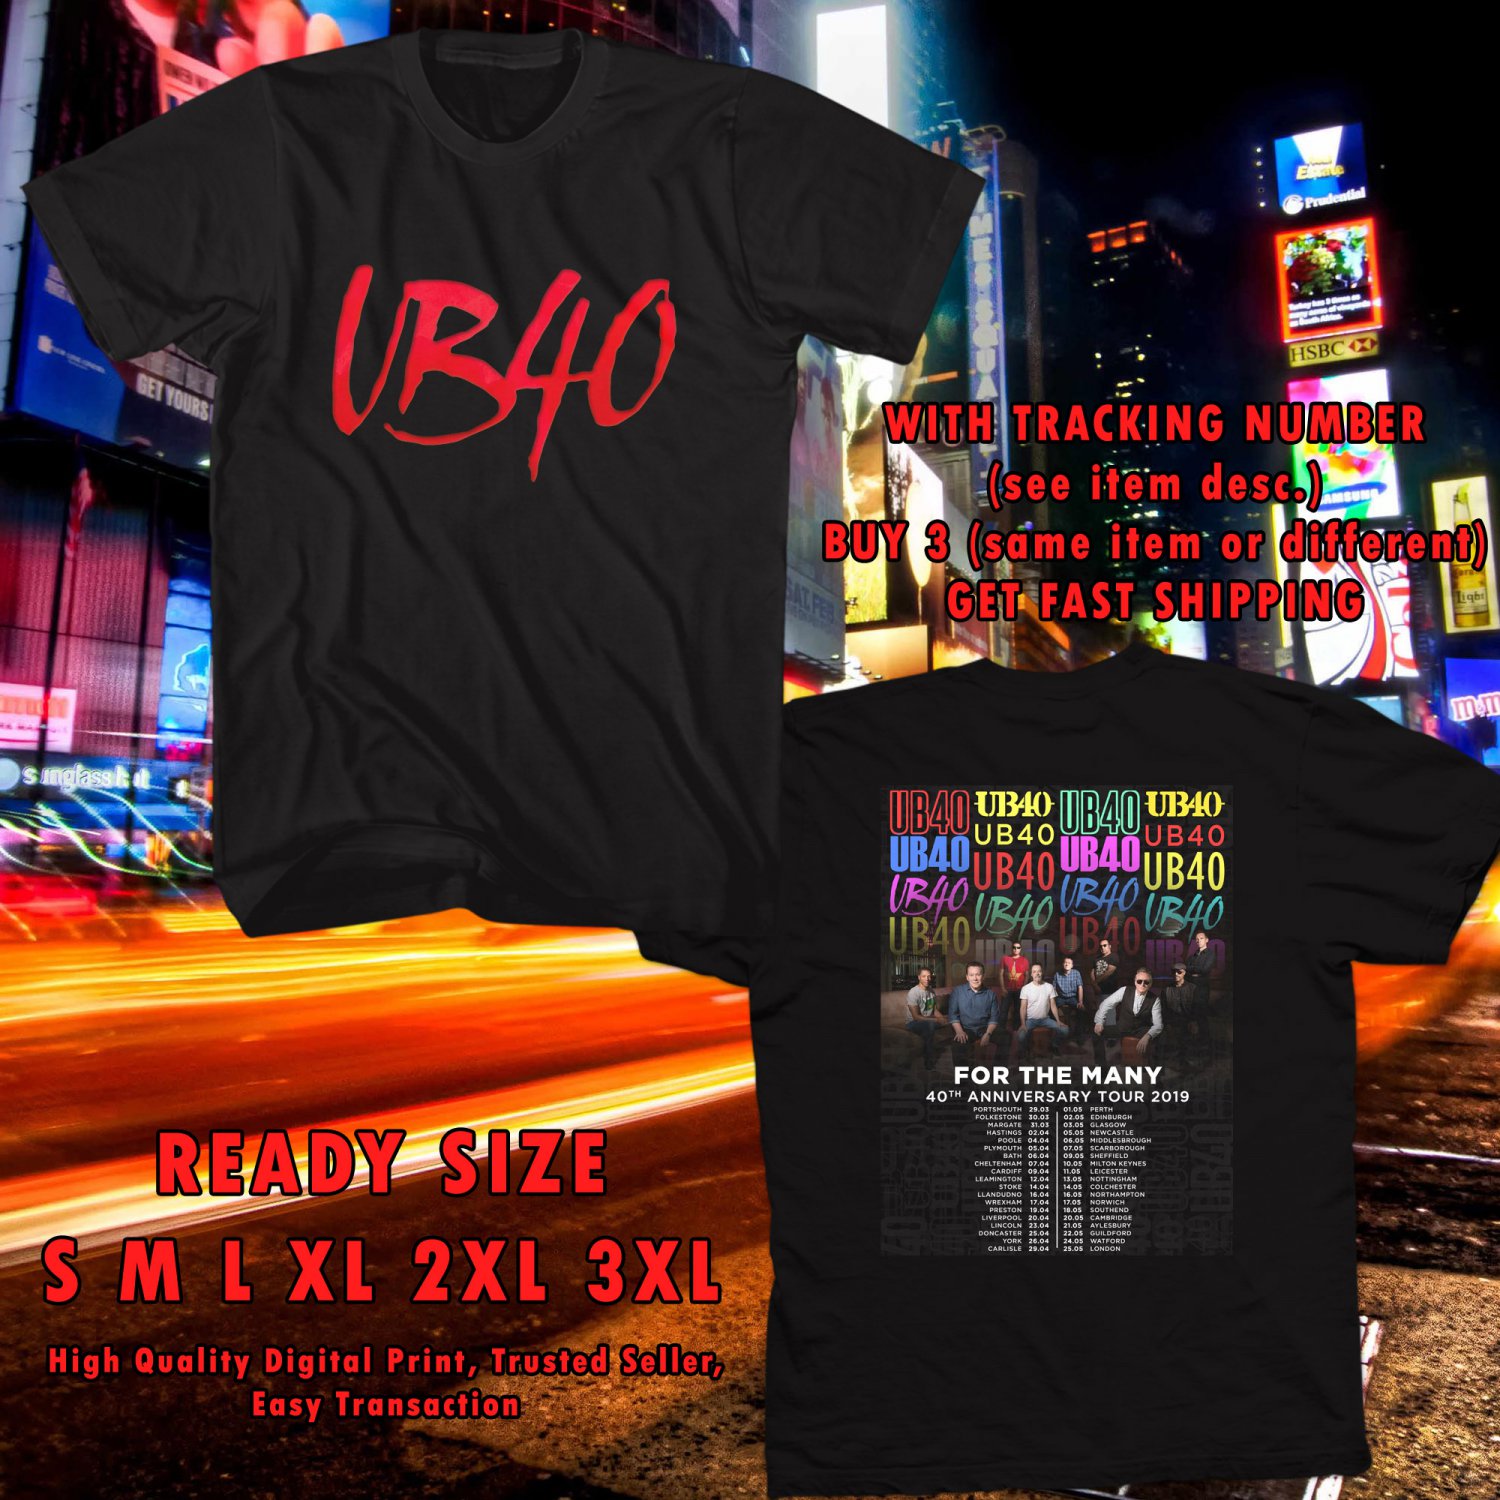 Get This UB40 For The Many 40th Anniversary United Kingdom Tour 2019 ...